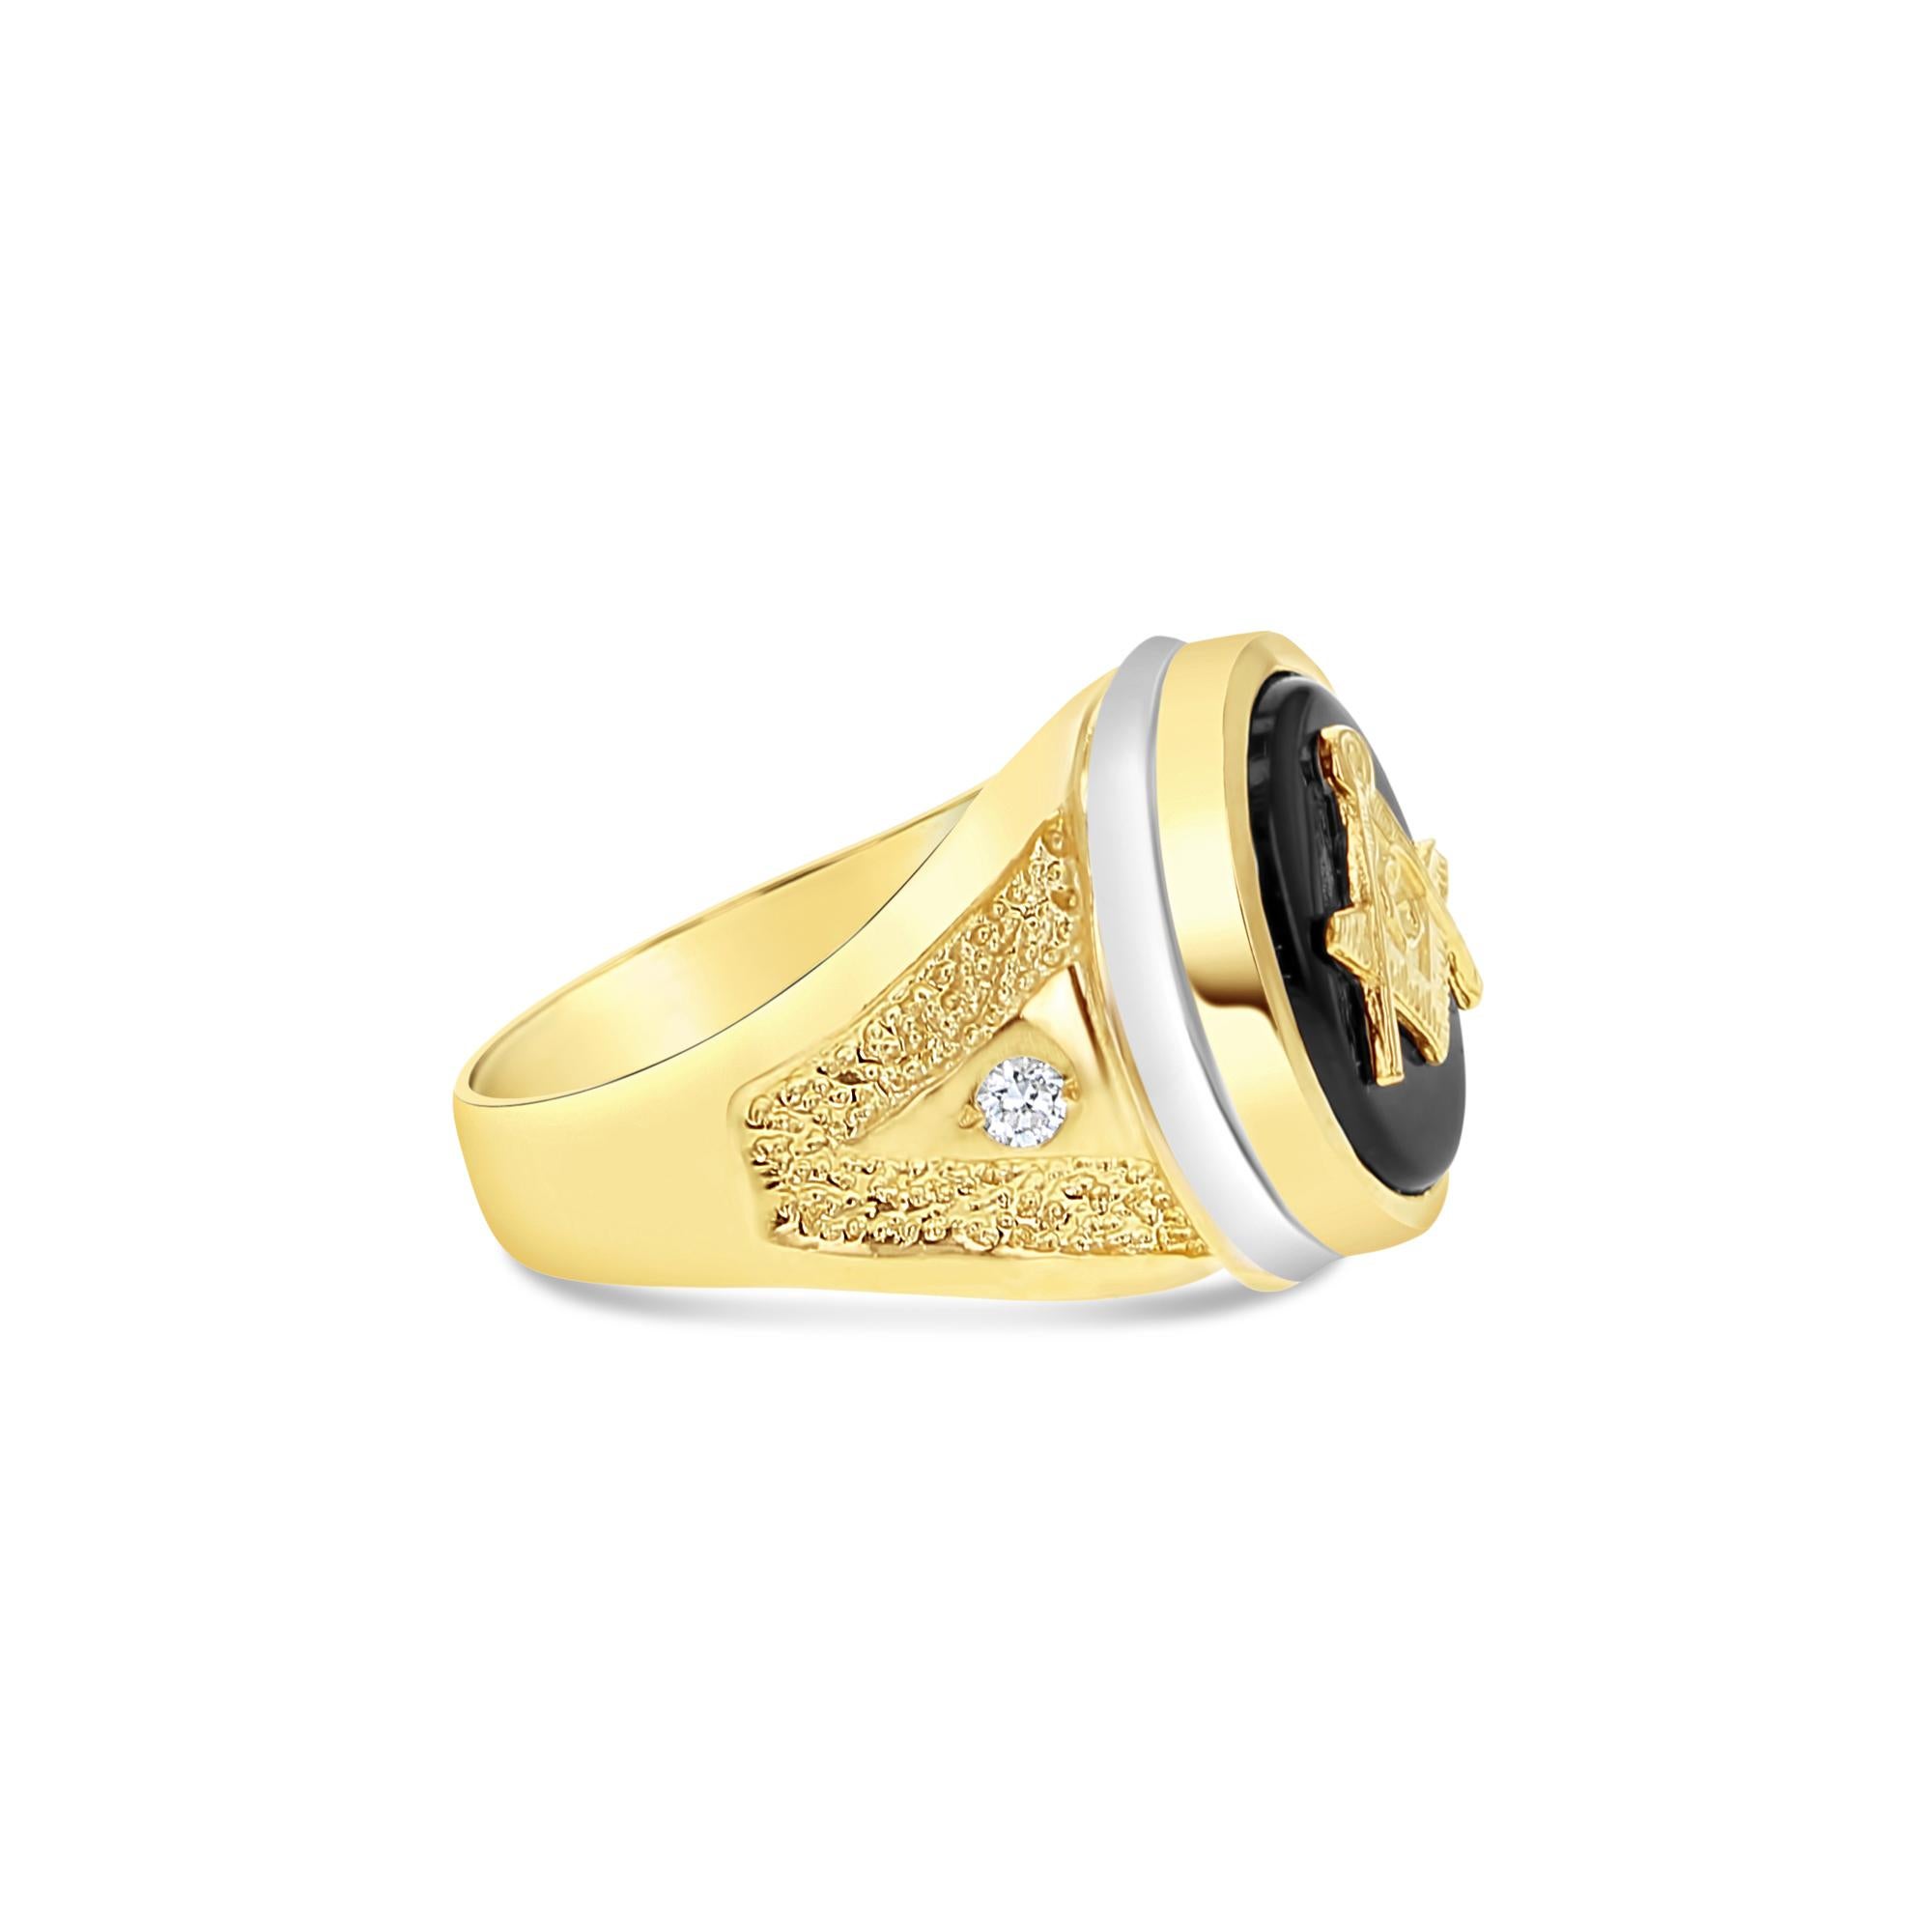 ♥ Product Summary ♥

Main Stone: Onyx
Side Stones: Cubic Zirconia
Band Material: 14k Yellow Gold
Weight: 10 grams 
Width: 18mm 
